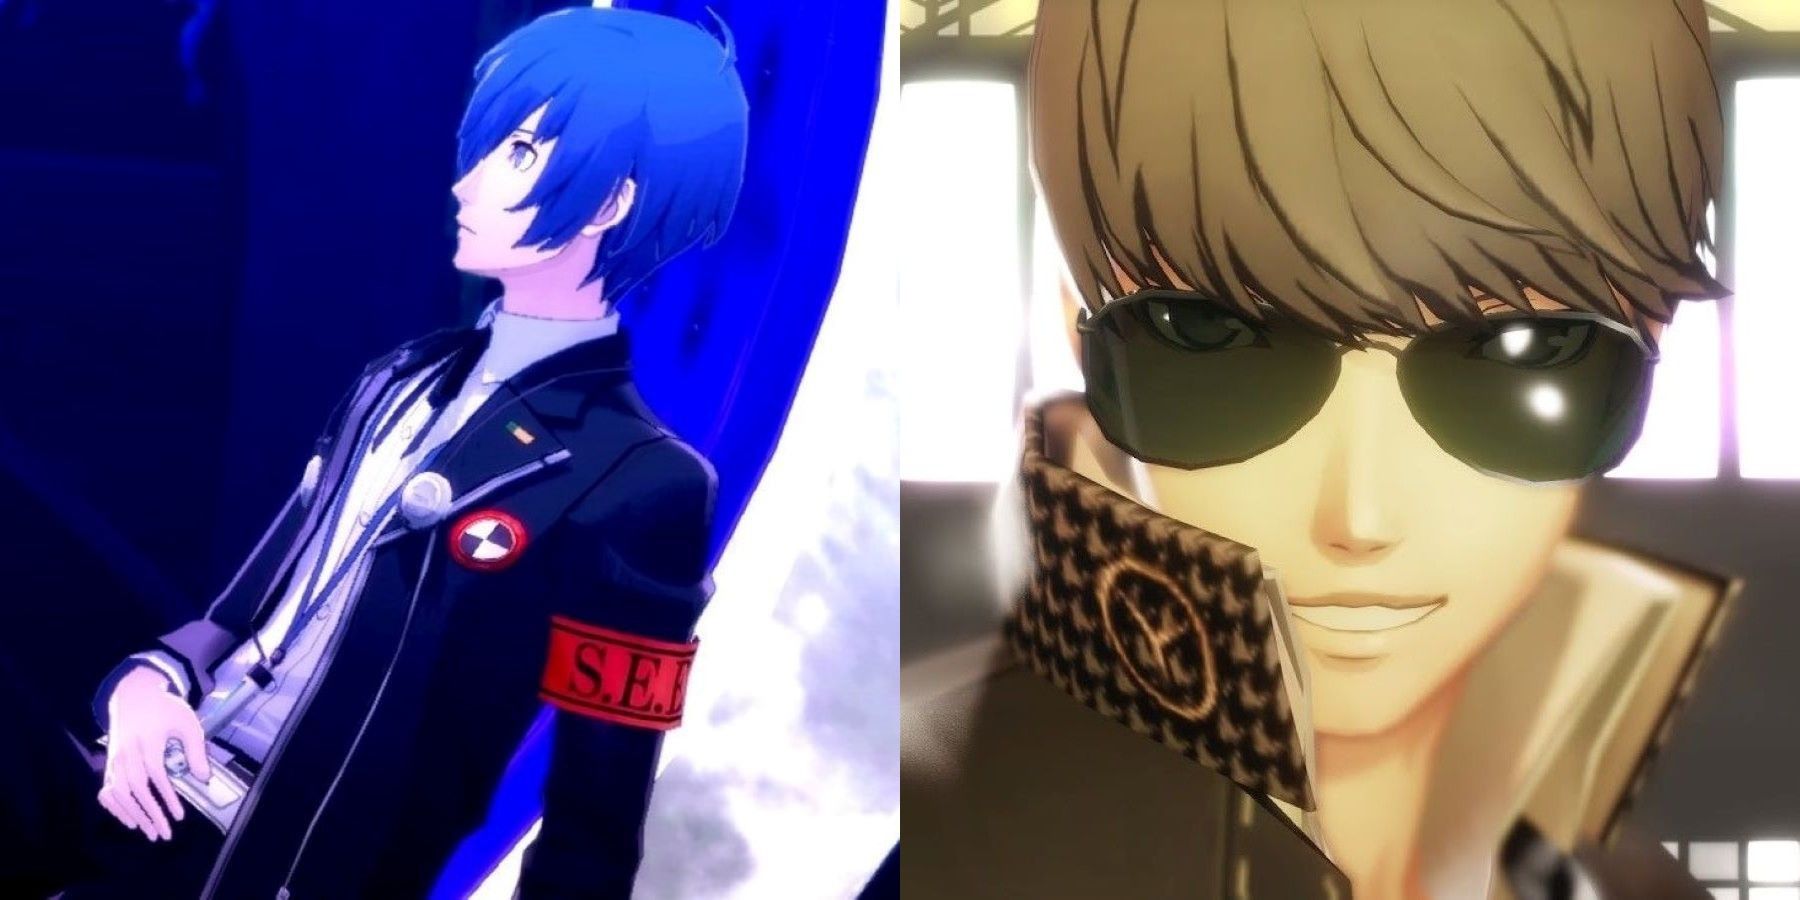 Persona 3 and Persona 4 protagonists